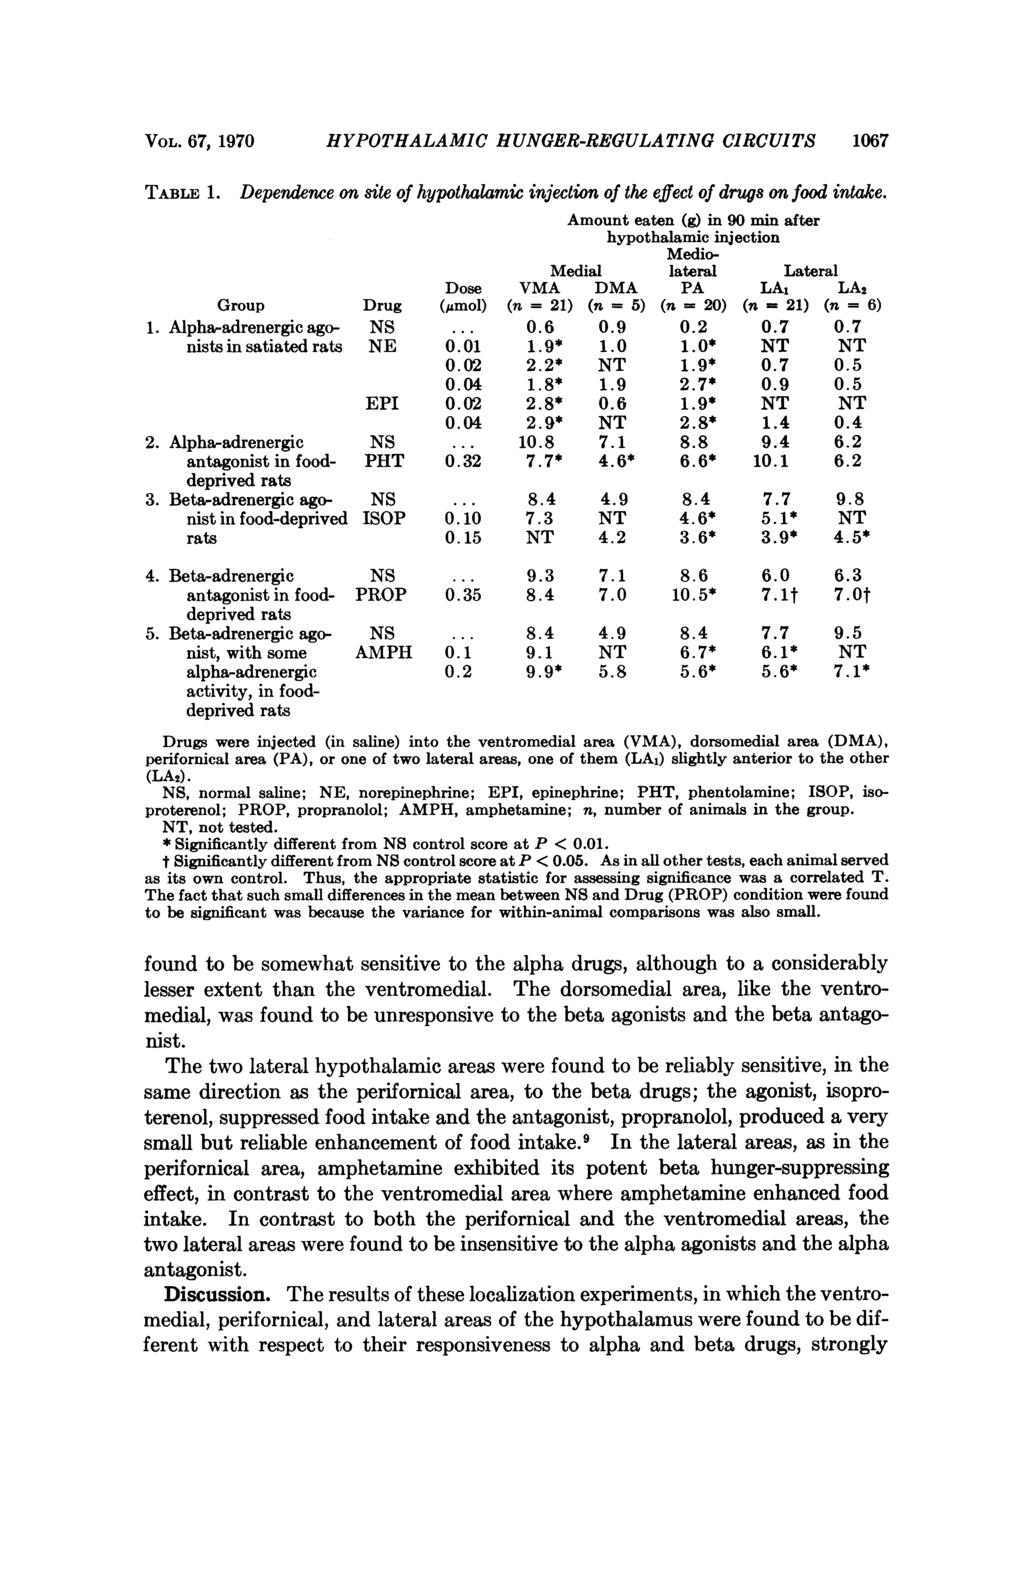 VOL. 67, 1970 HYPOTHALAMIC HUNGER-REGULATING C1RCUITS 1067 TABLE 1. Dependence on site of hypothalamic injection of the effect of drugs on food intake.